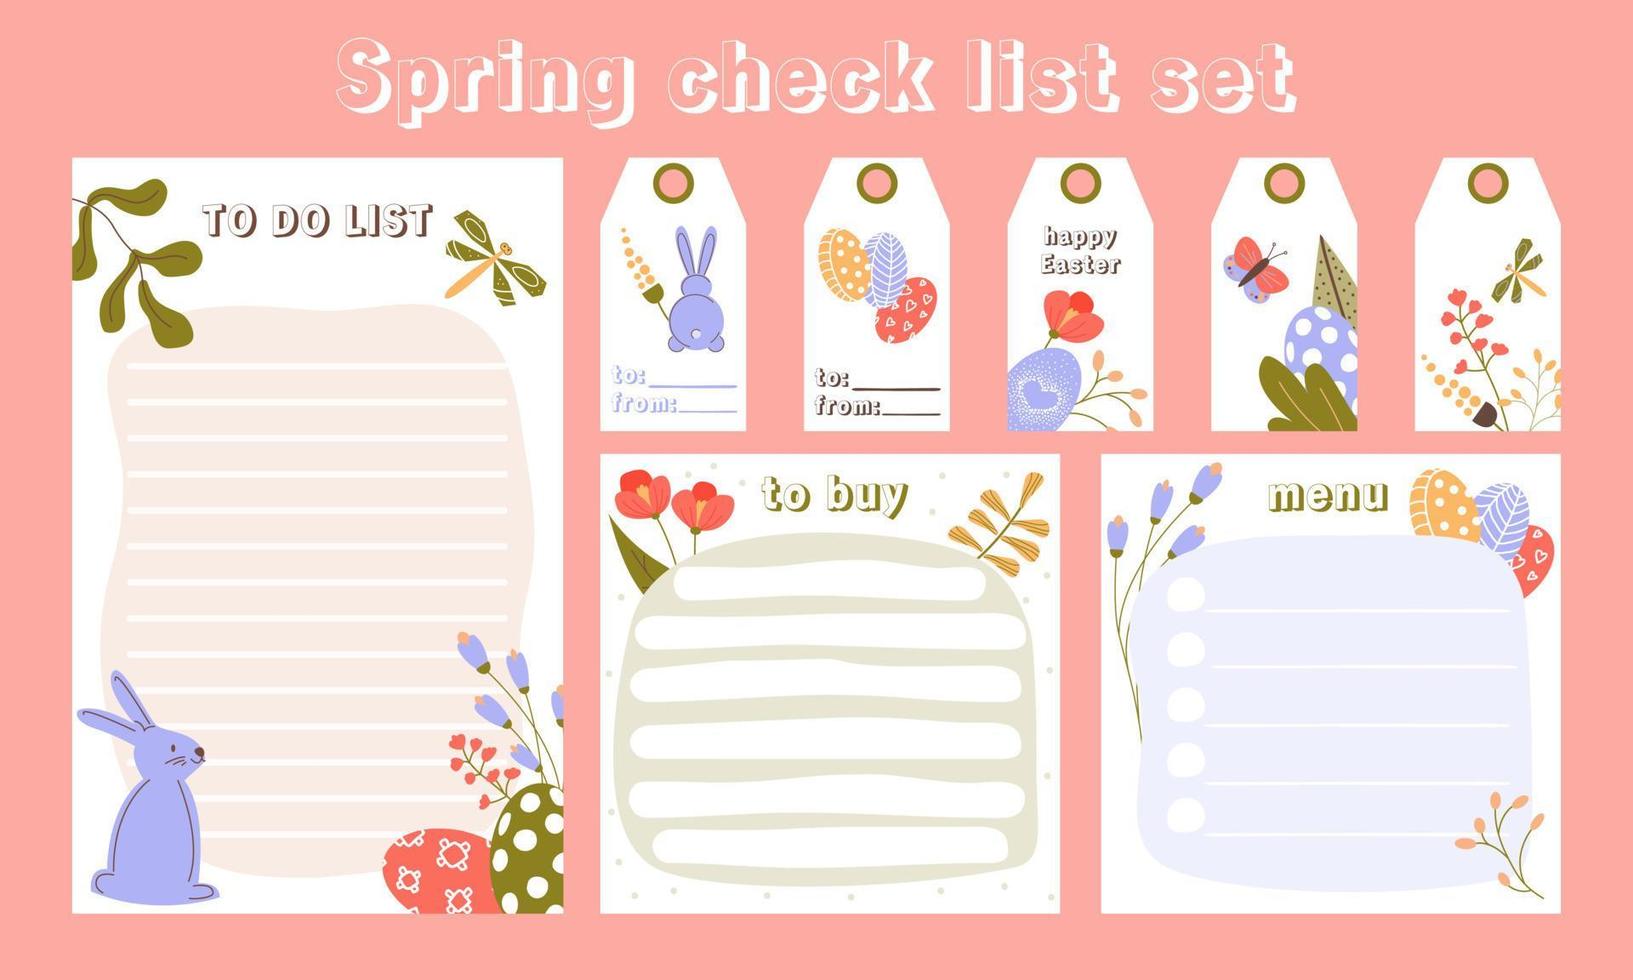 Set of Easter to do lists, pages for notes, labels and tags. Cute spring checklists templates. Colored flat vector illustration with floral decoration